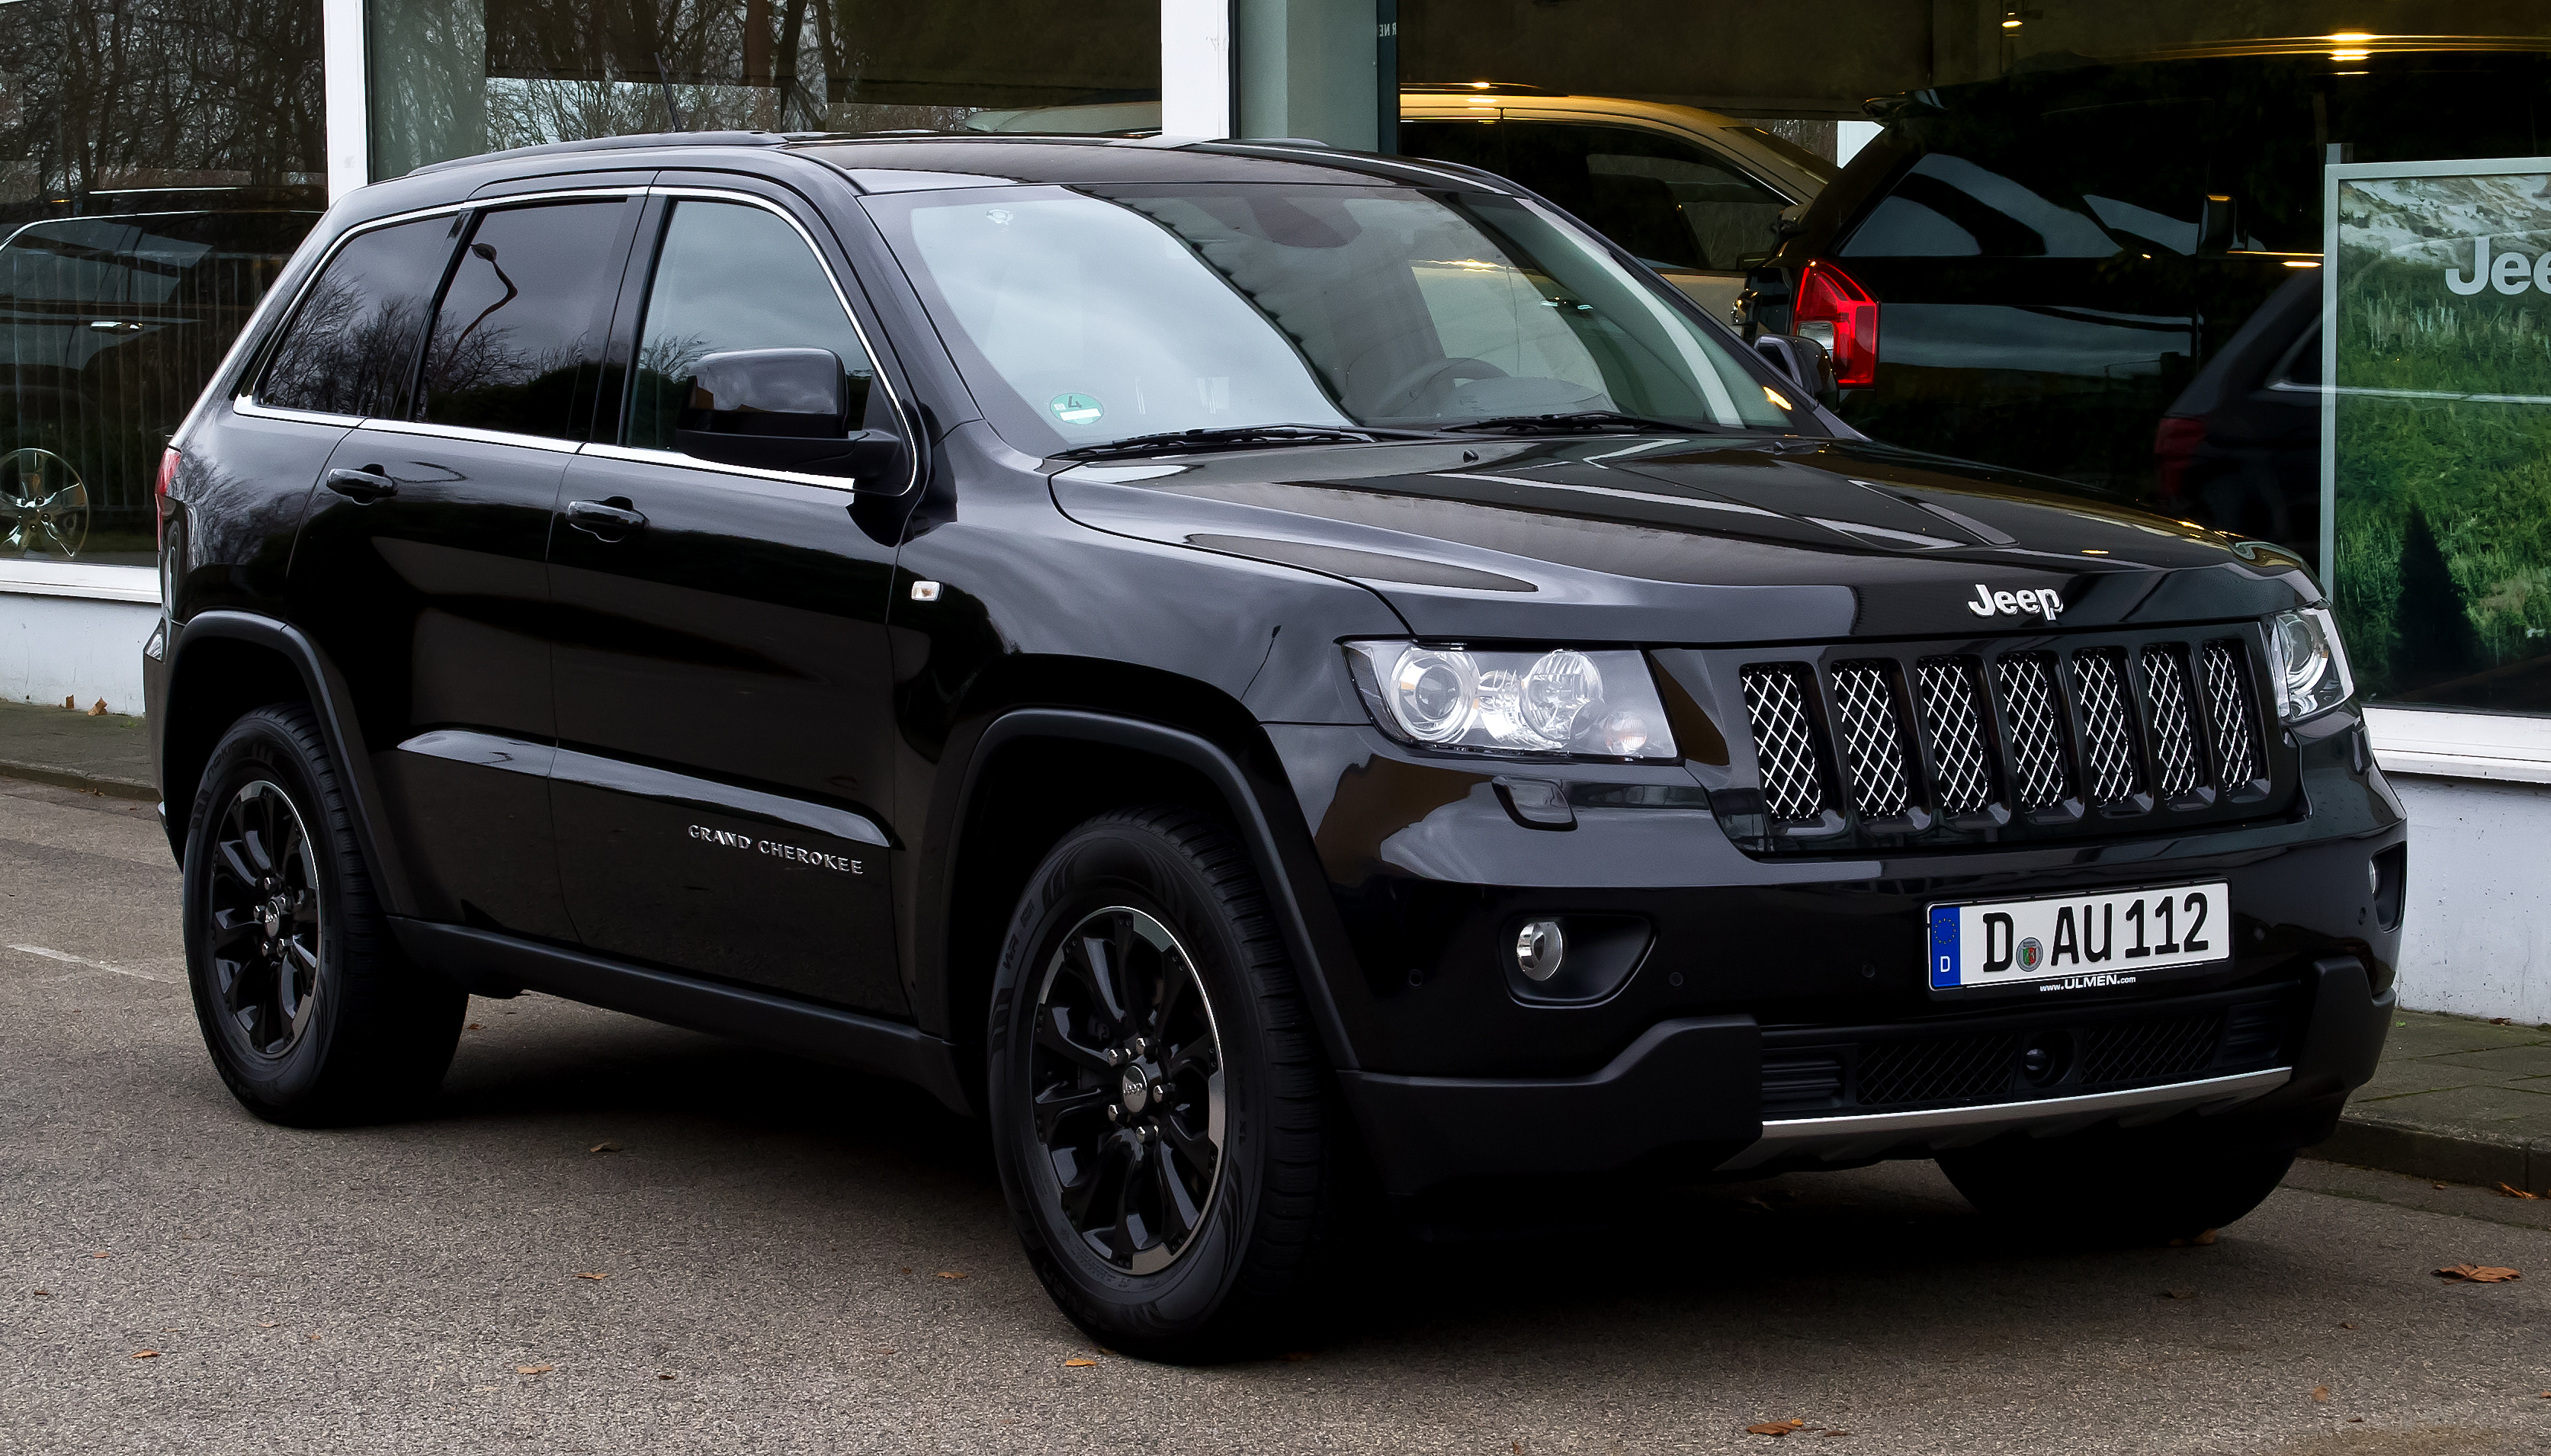 Jeep Grand Cherokee SLimited 3.0 CRD technical details